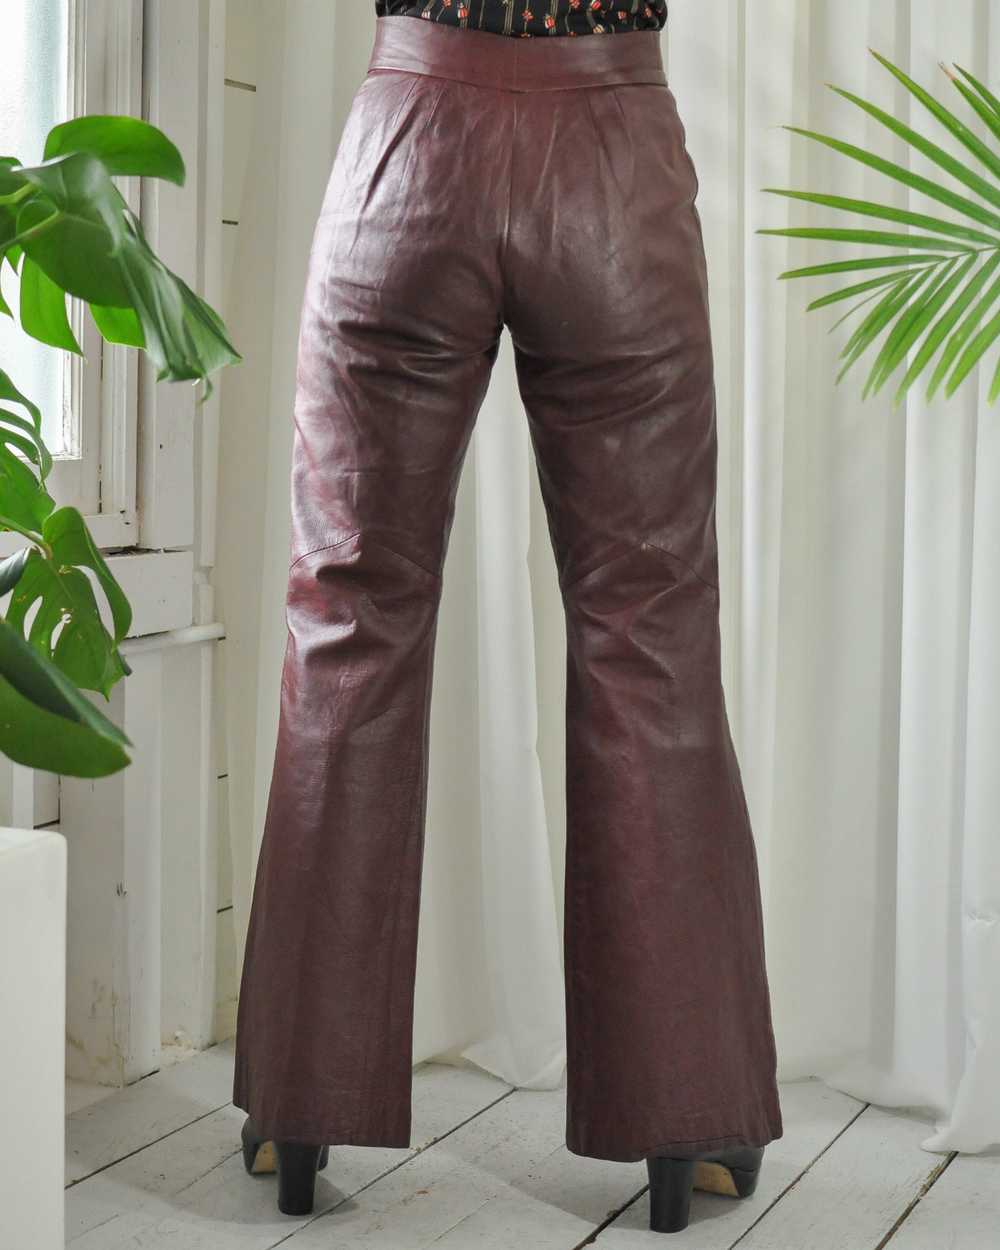 70s Burgundy Leather Pant Suit - image 9